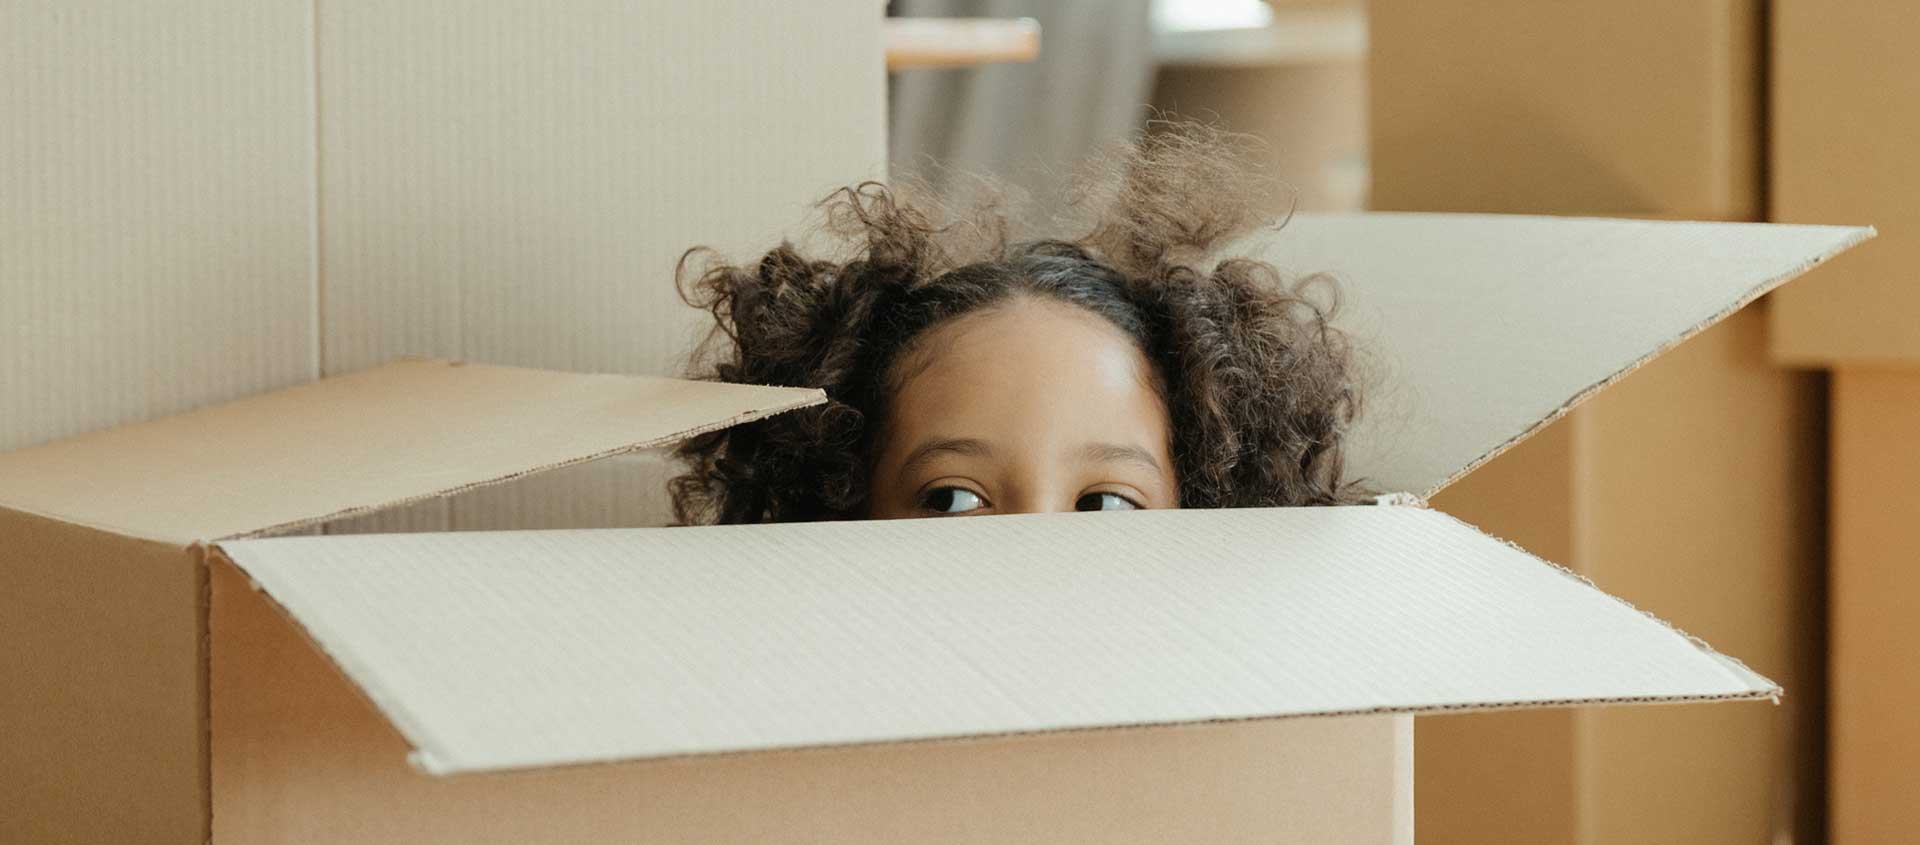 A girl with curly dark hair peeks over the edge of a moving box.